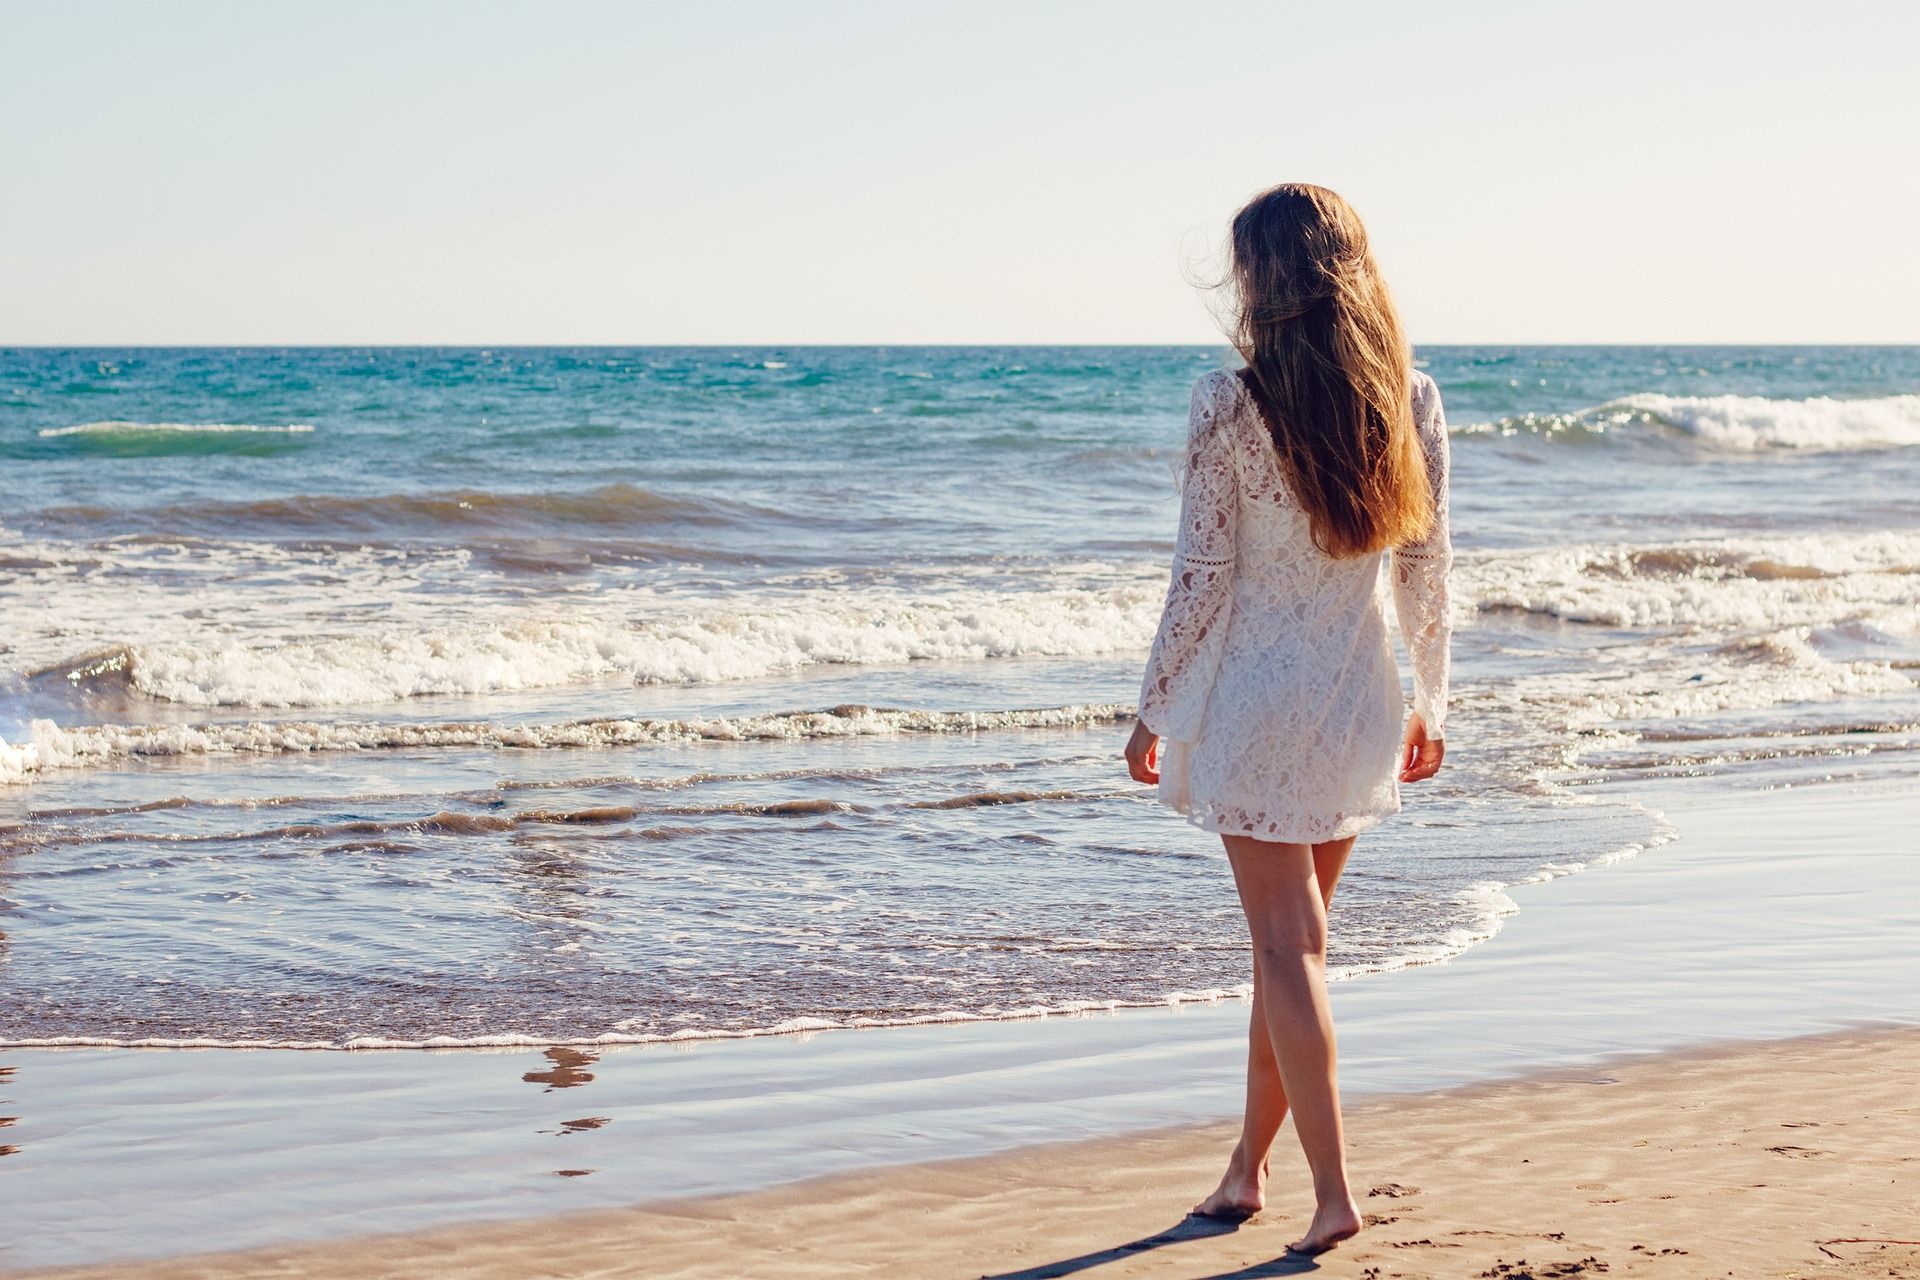 A young woman walking on the beach in the surf line